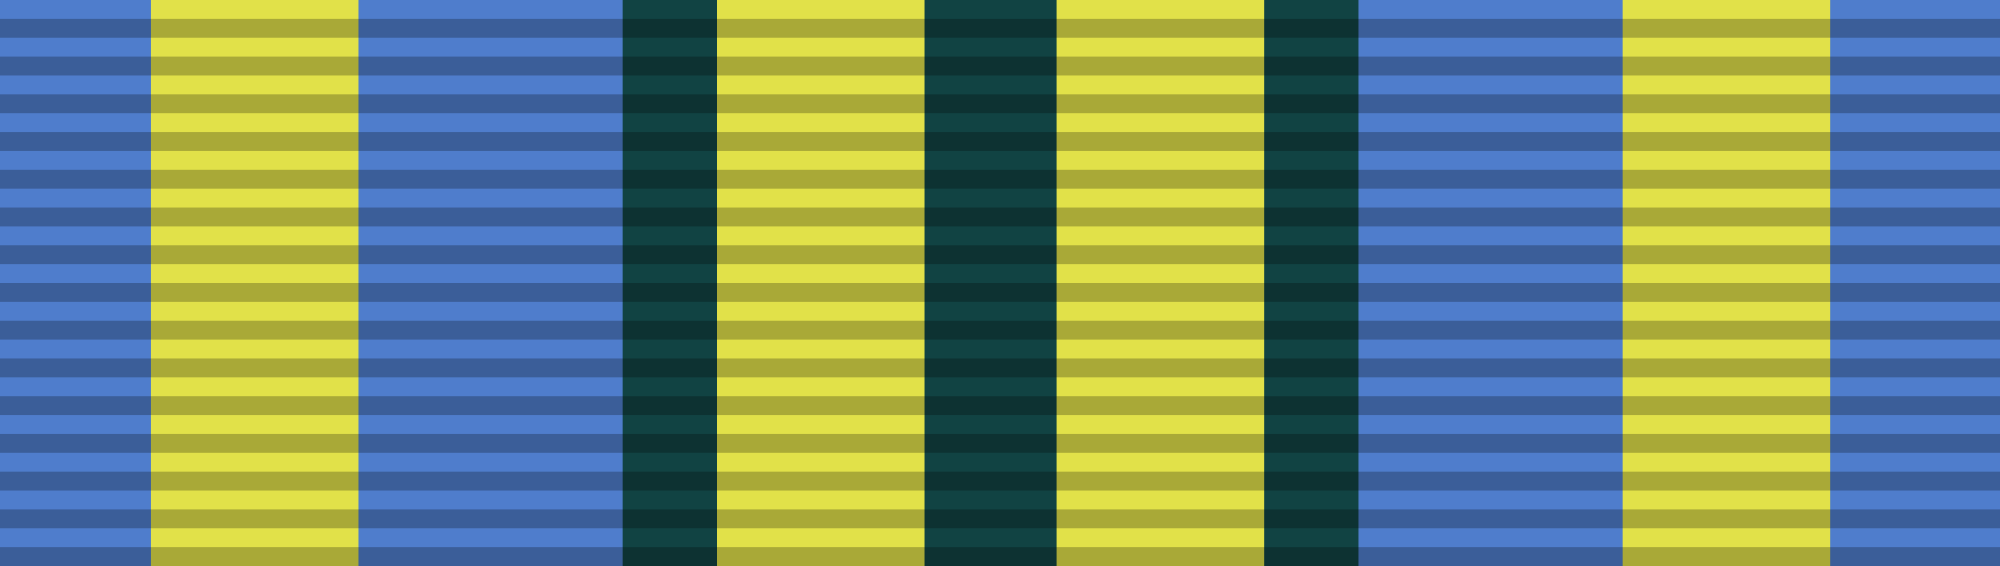 2000px-Outstanding_Volunteer_Service_ribbon.svg